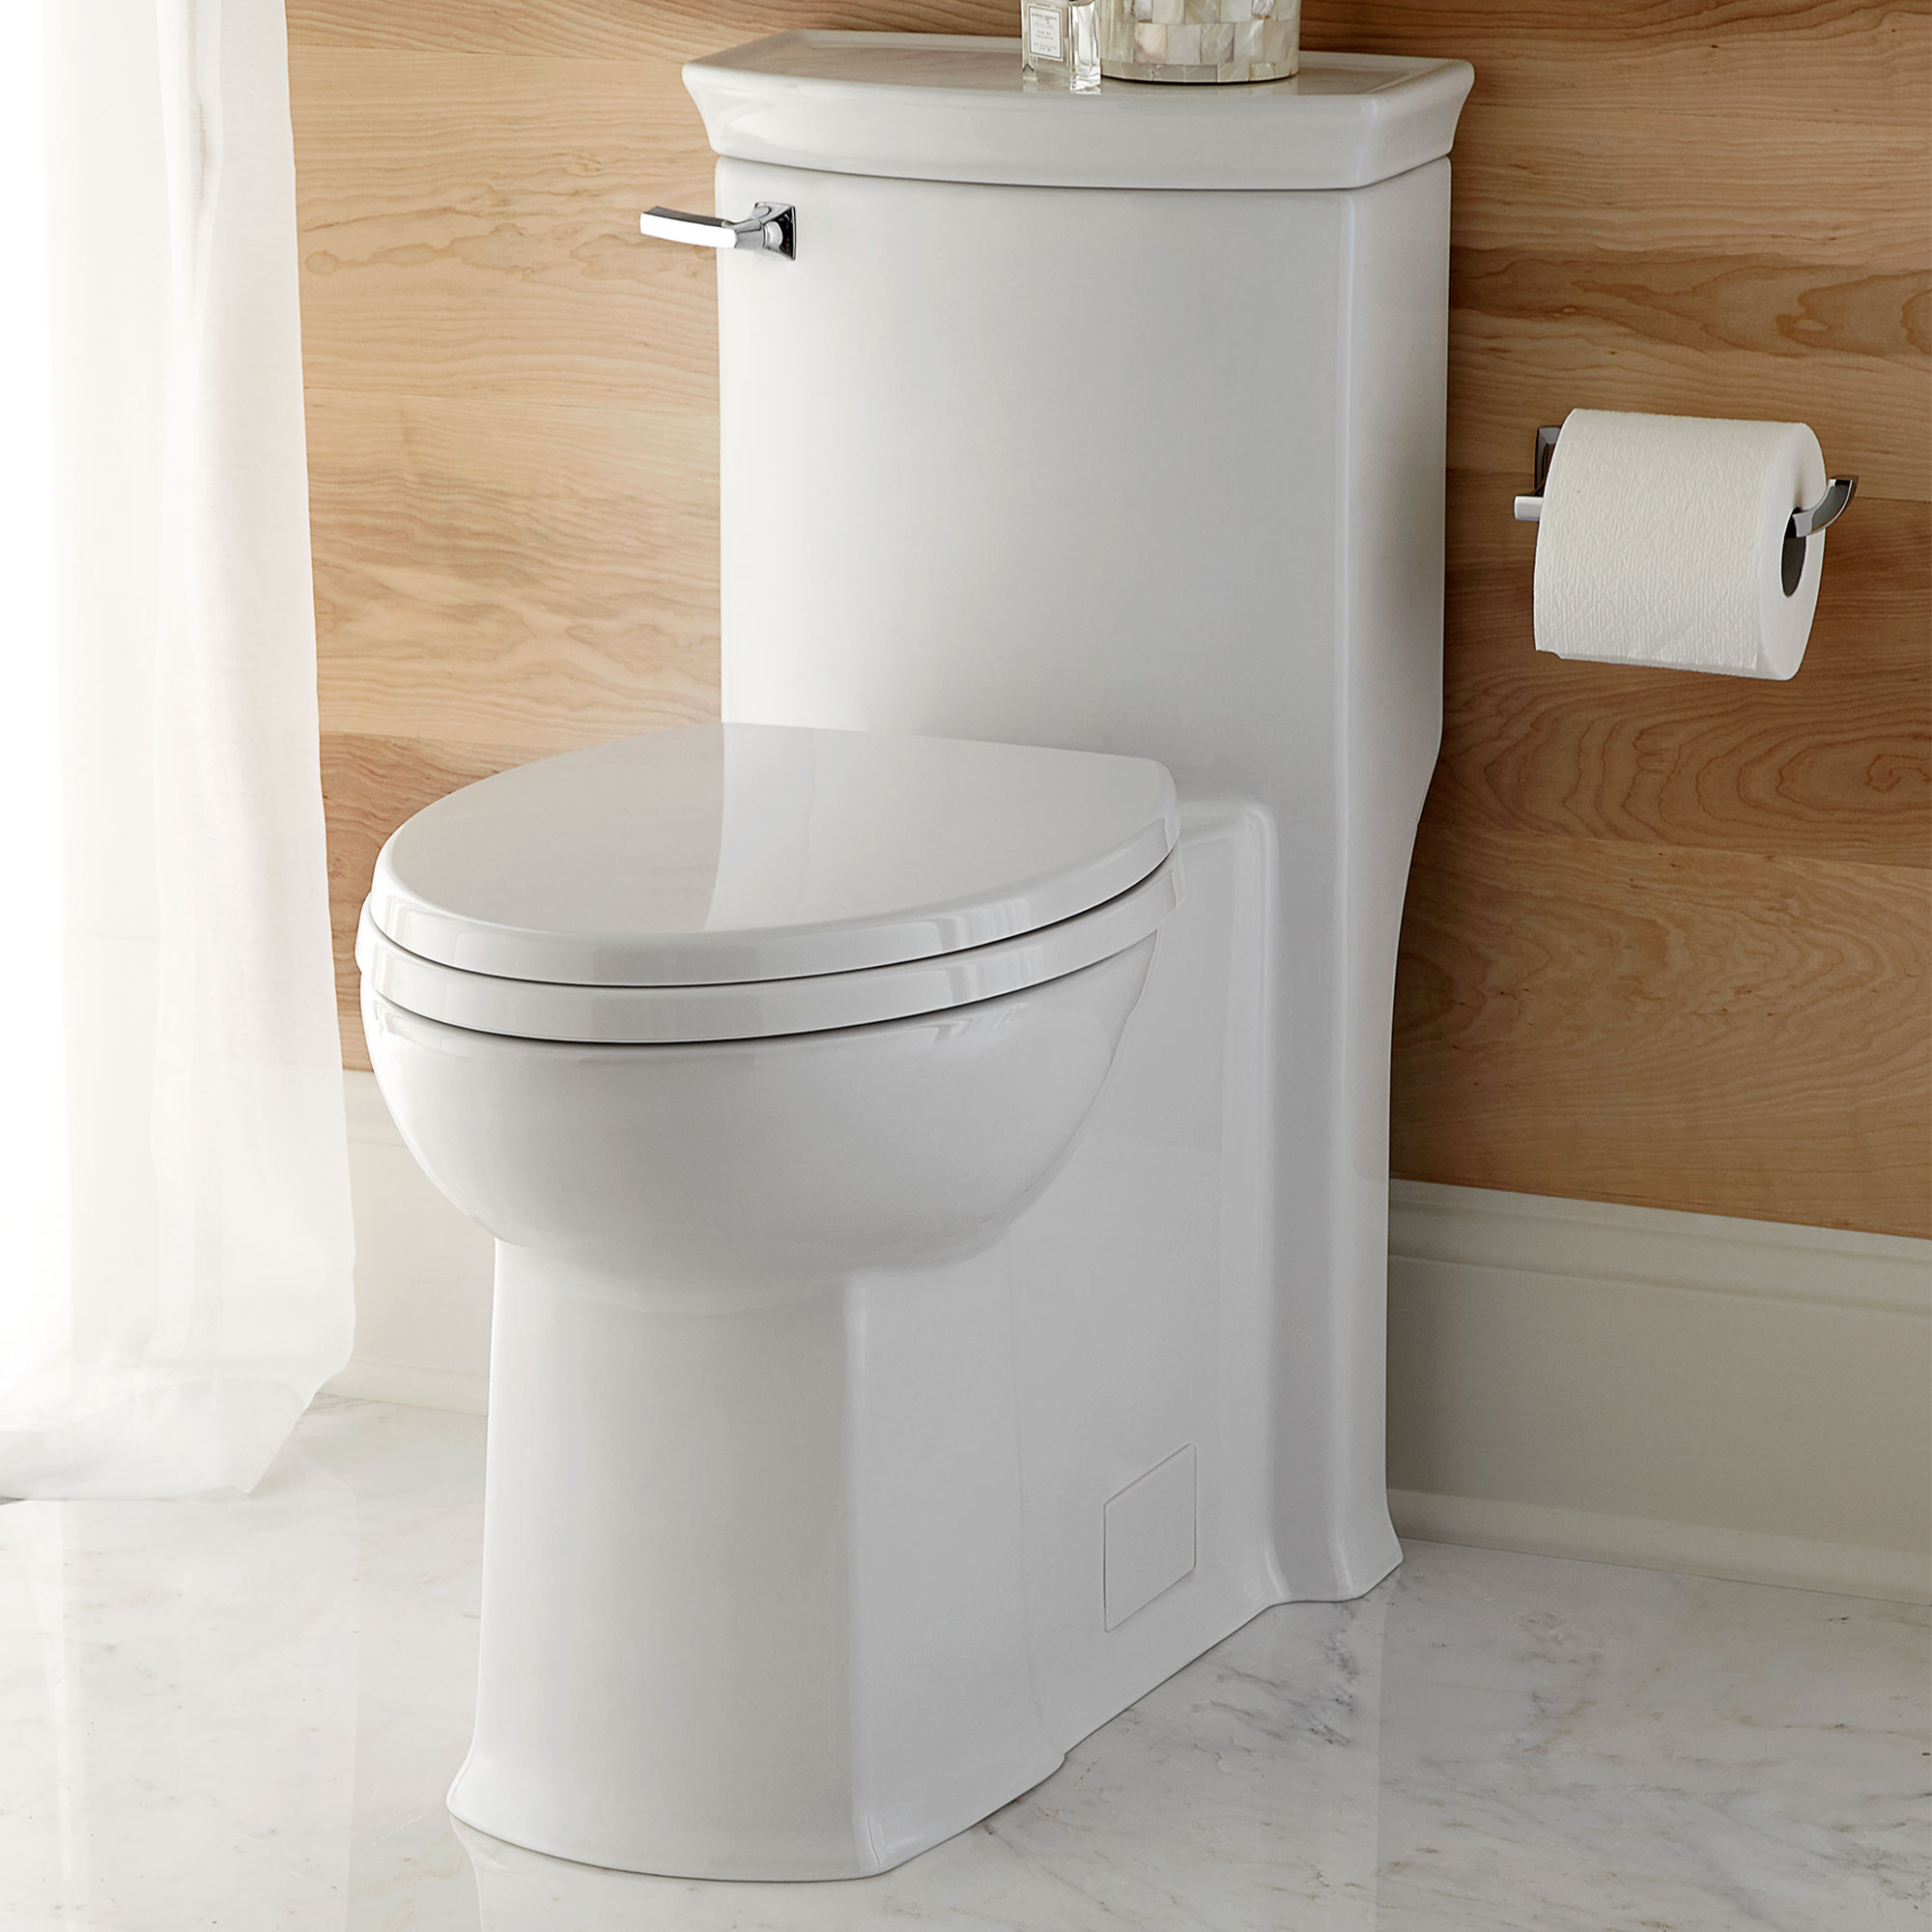 Wyatt® One-Piece Chair-Height Left-Hand Trip Lever Elongated Toilet with Seat